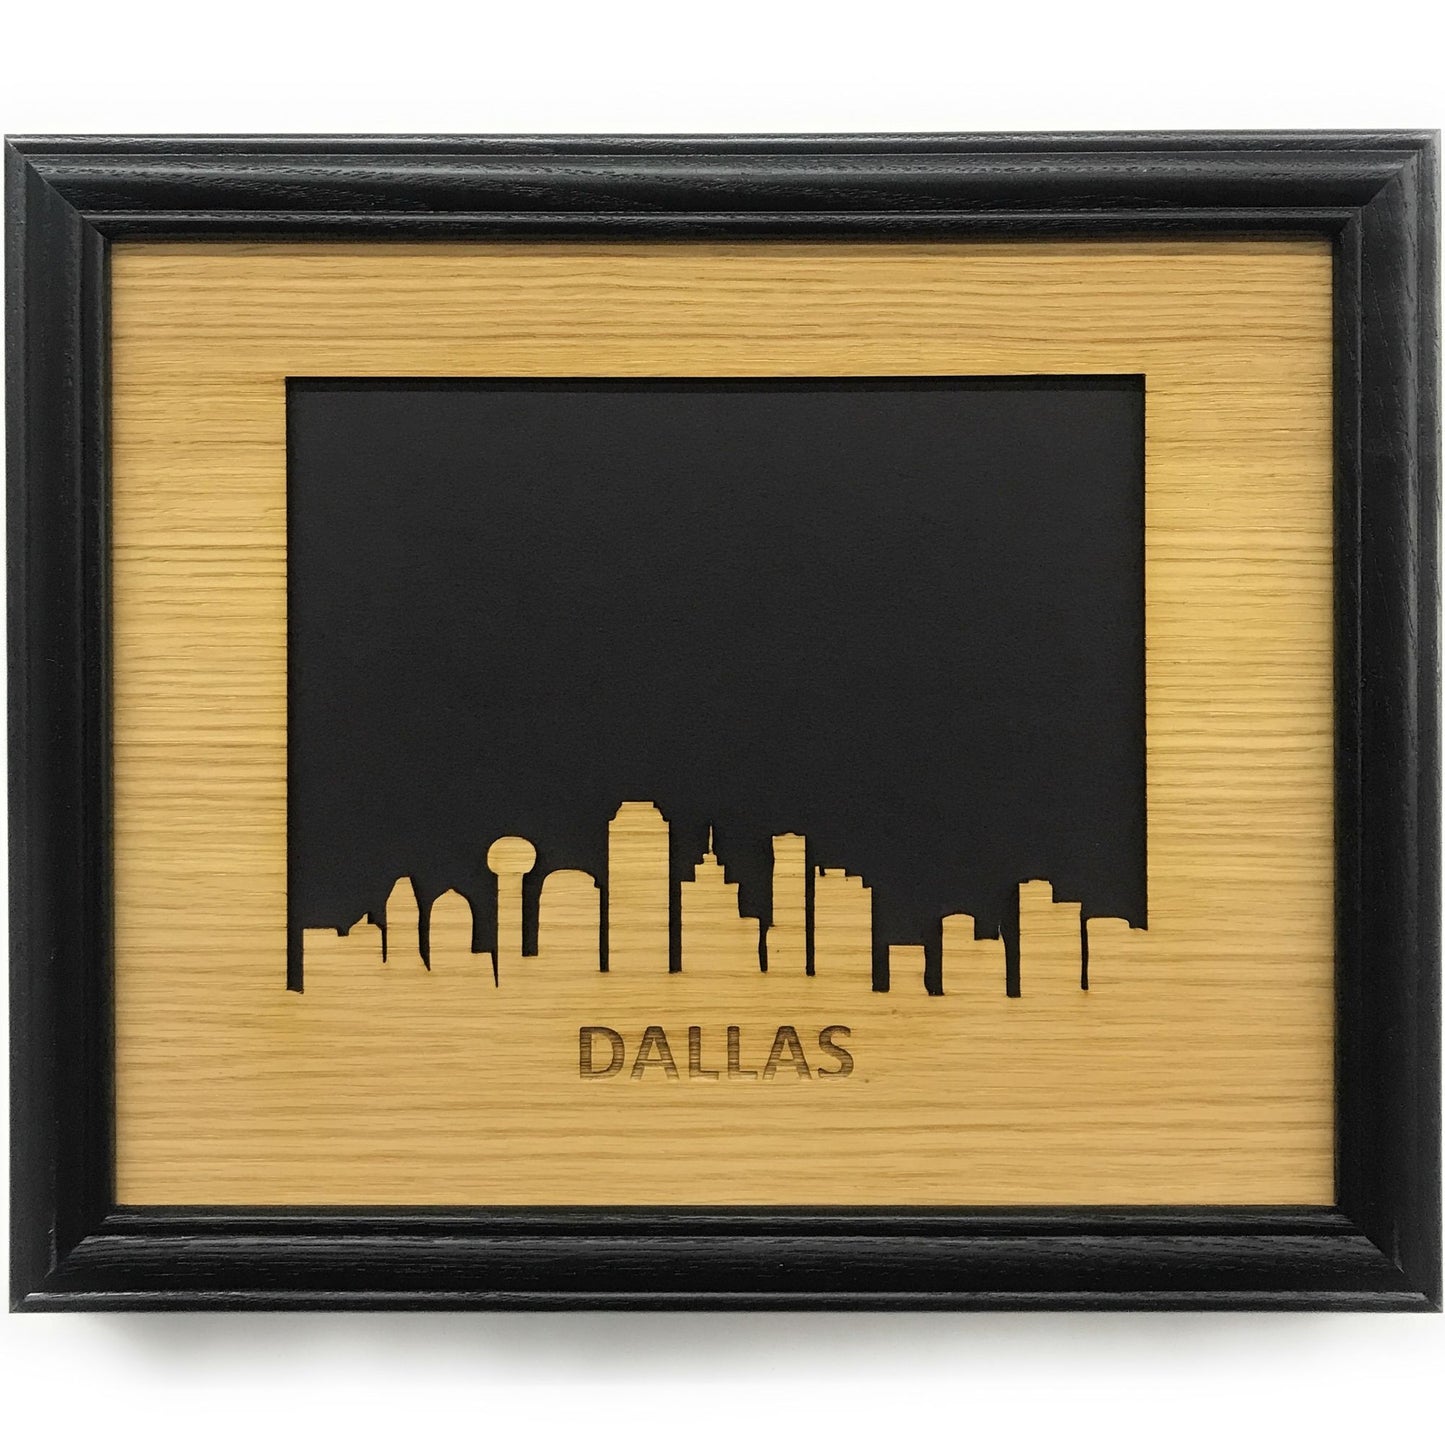 Dallas Picture Frame - 8x10 Frame Hold 5x7 Photo